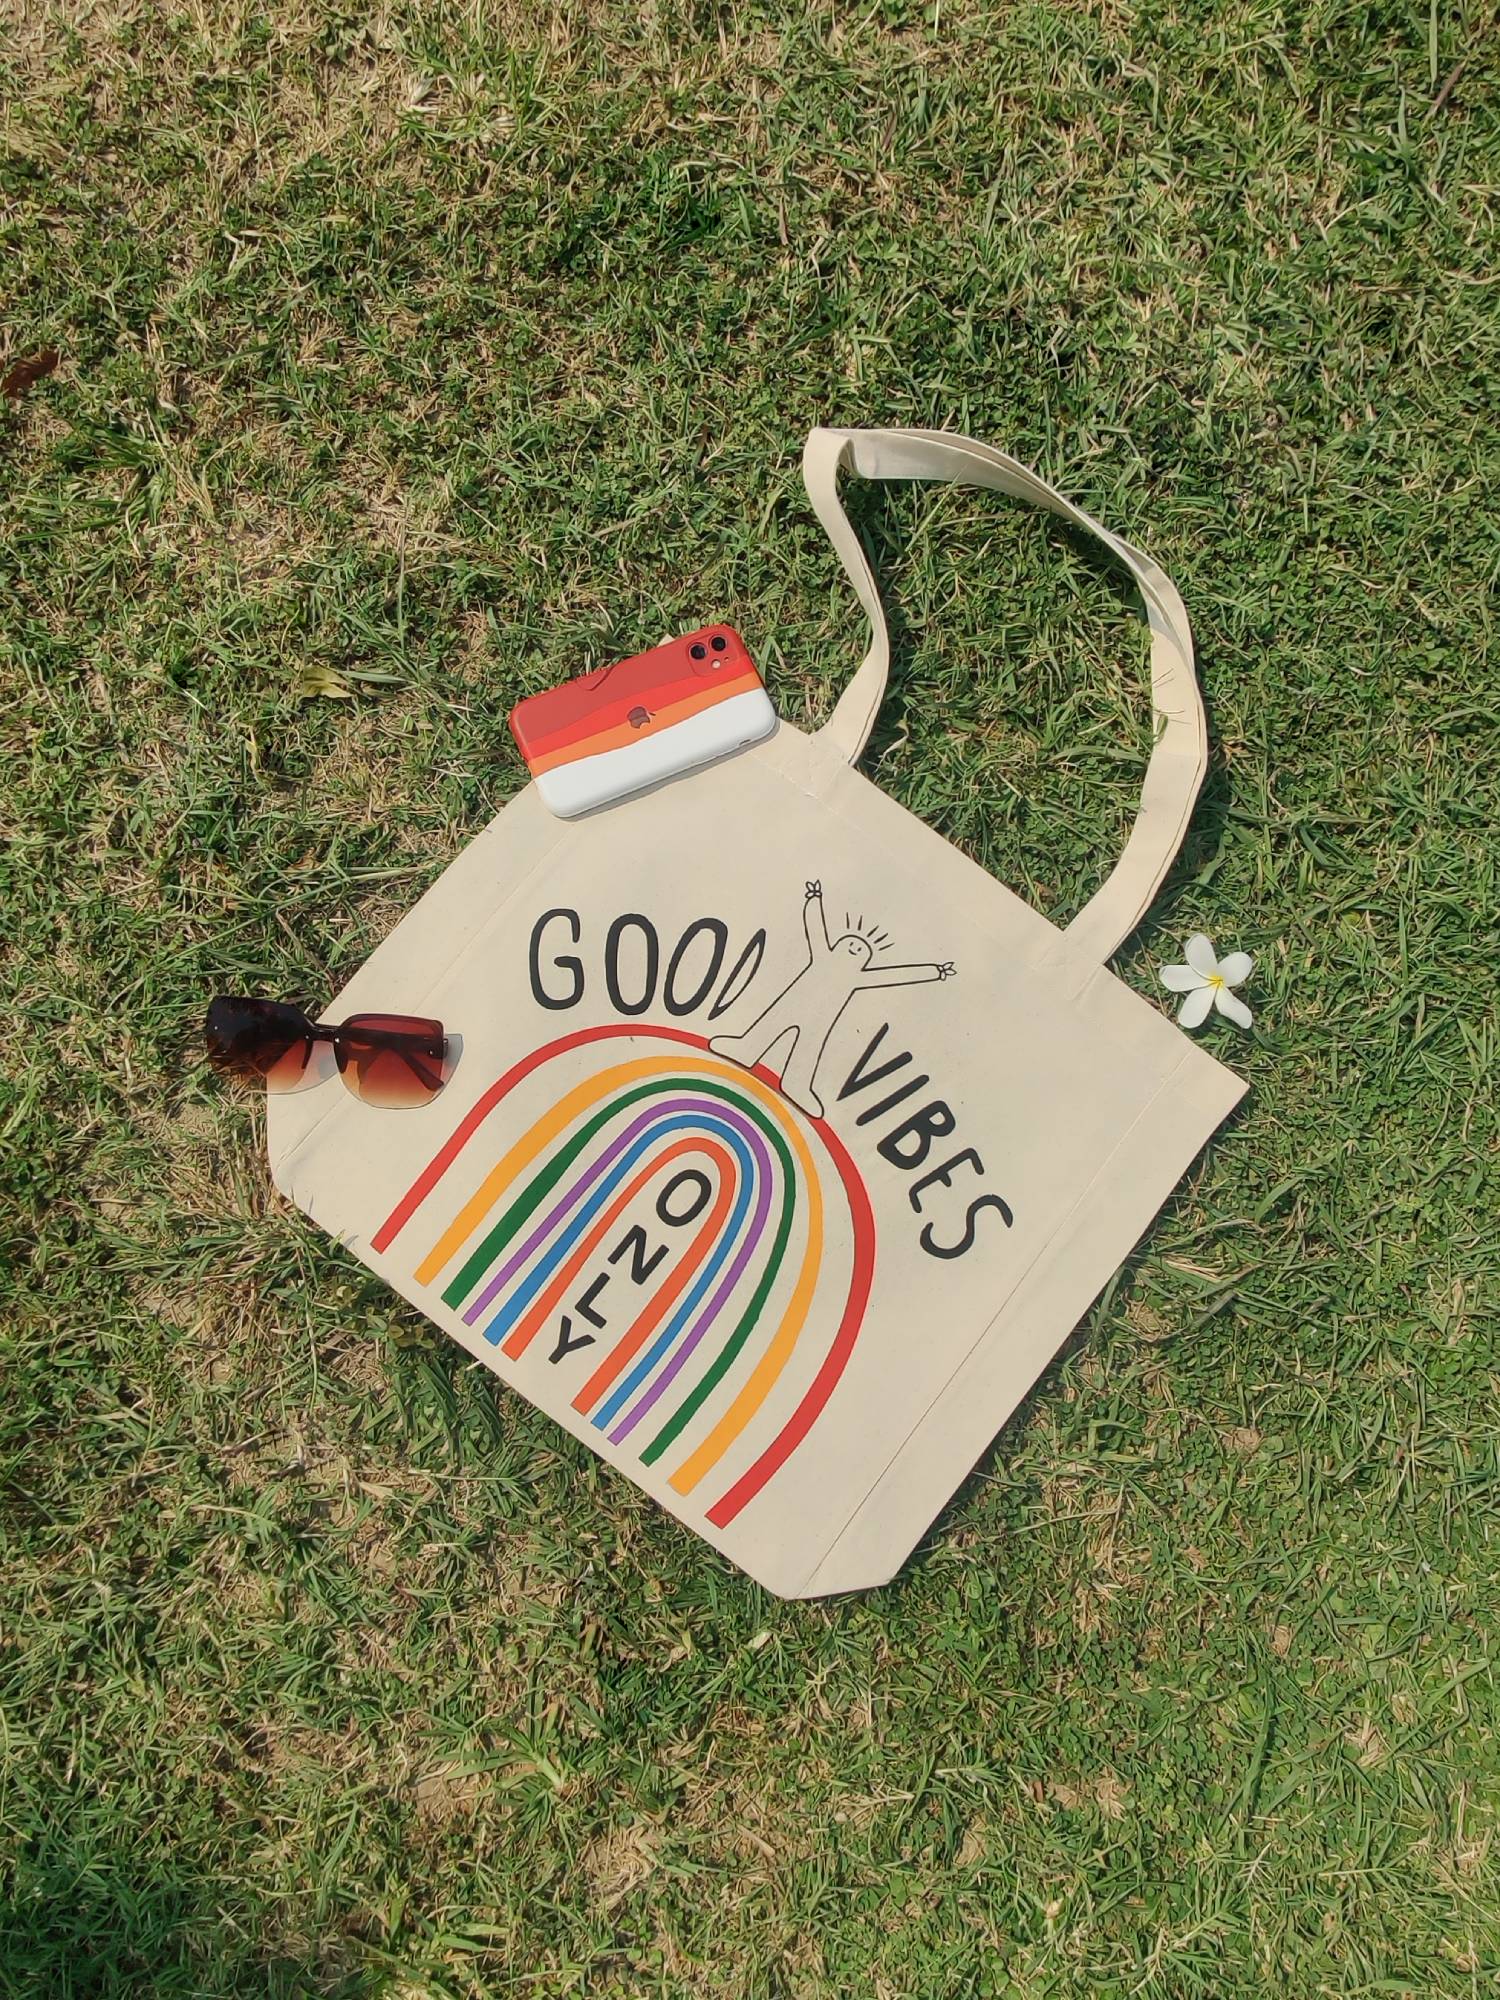 Bags for Good - Recycled Polyester Bags - Sustainable Fashion | Orla Kiely